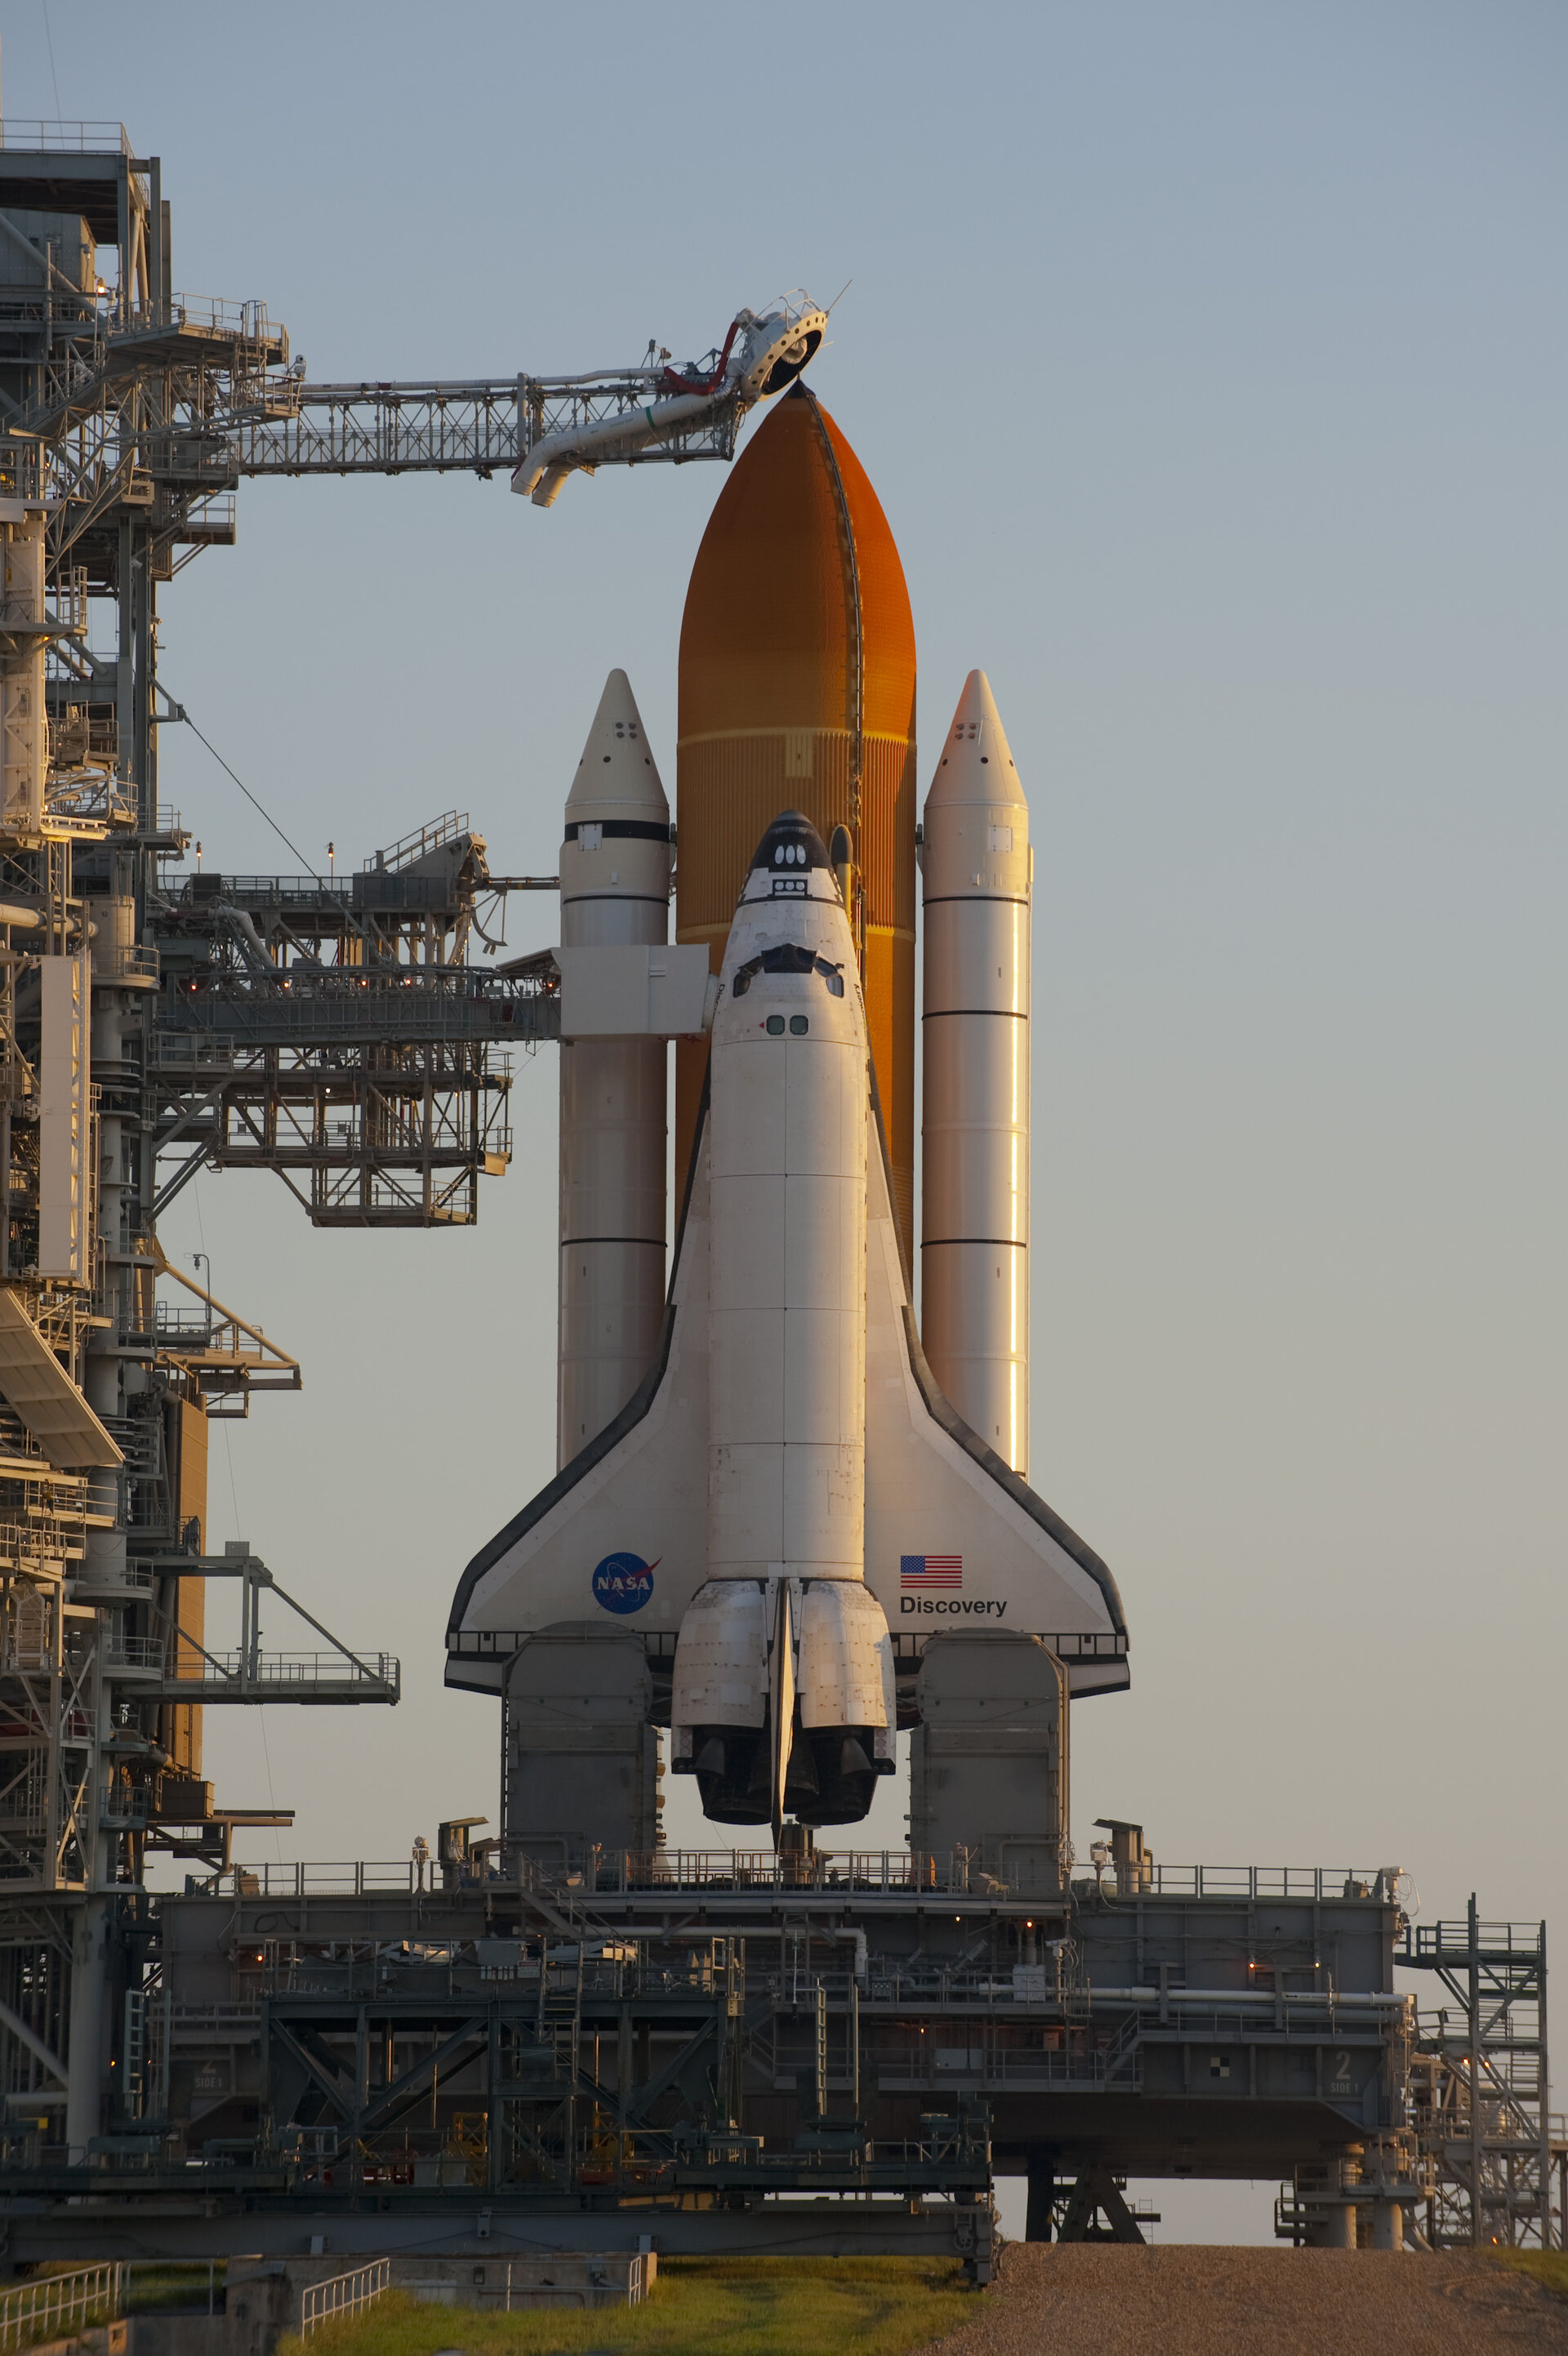 ESA - Space Shuttle Discovery on the launch pad